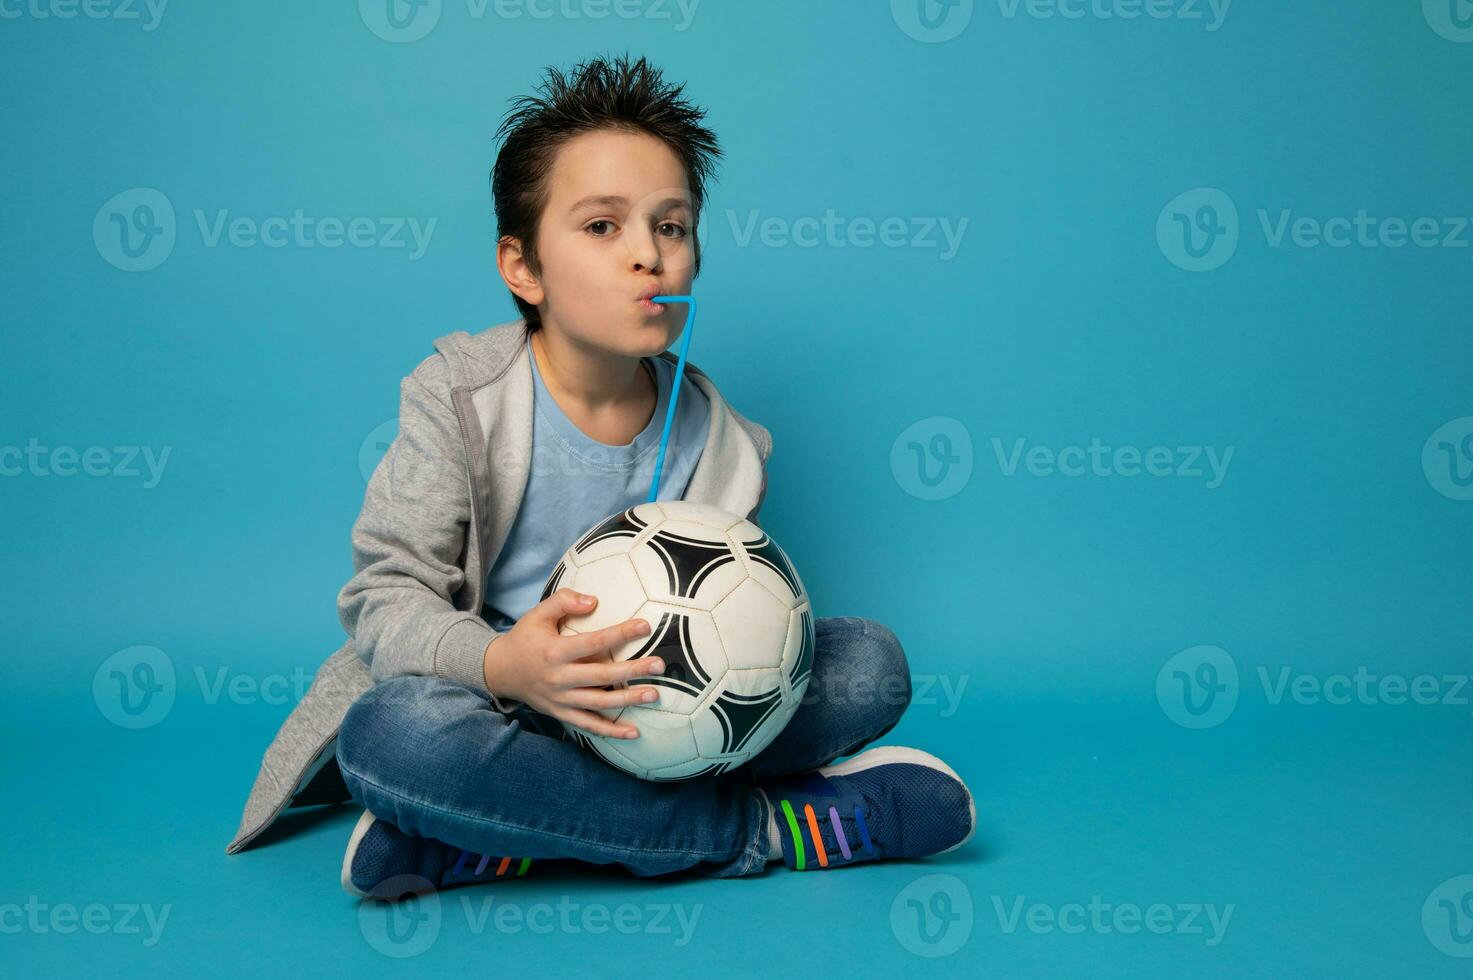 Handsome boy sitting on blue background , holding a soccer ball and drinking from a straw photo